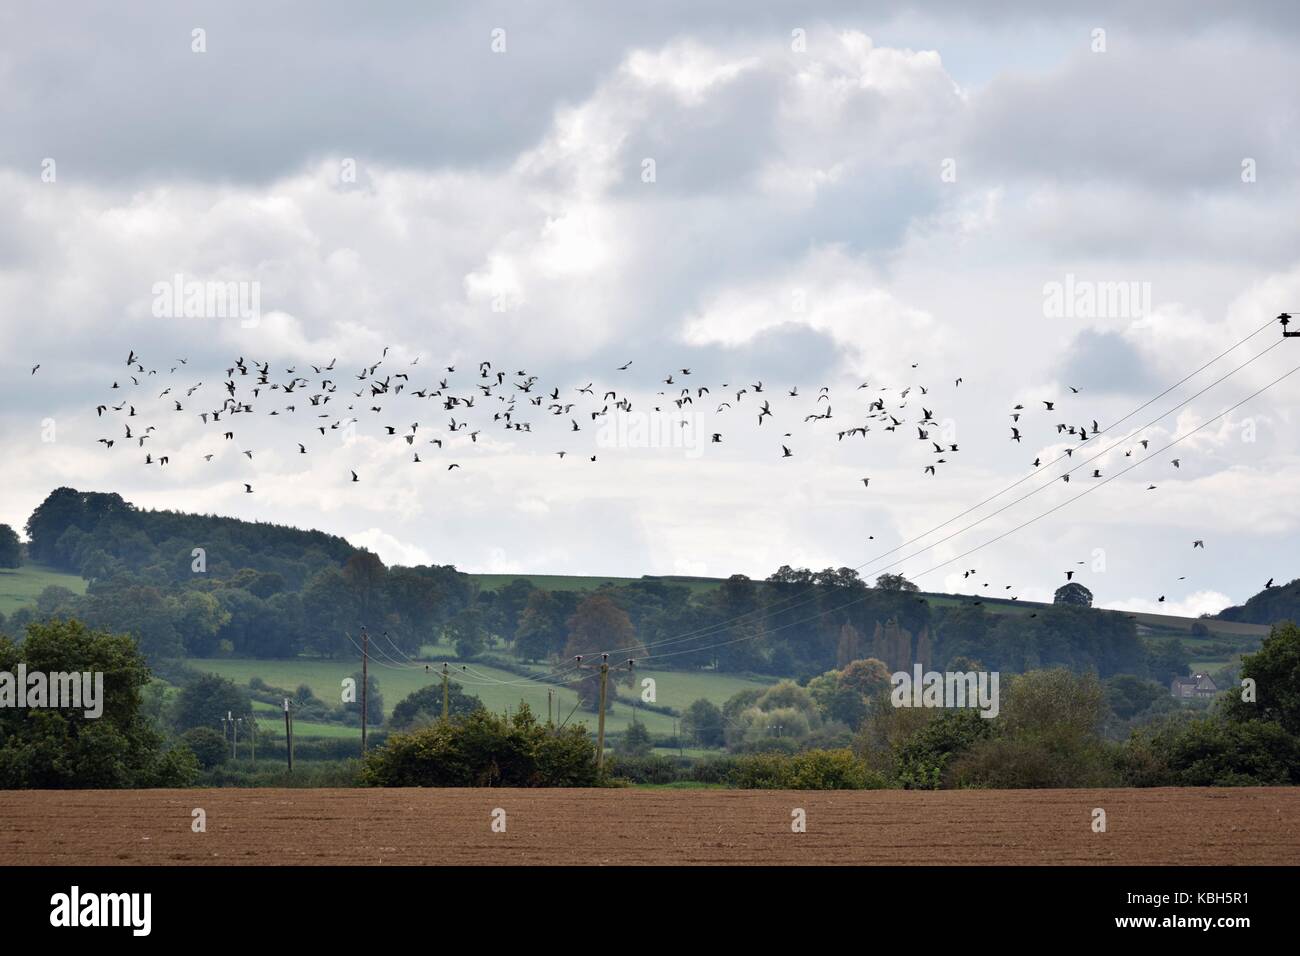 A ploughed field in a beautiful part of the countryside with a large group of birds flying off. Farmland down a quiet lane at the edge of the village. Stock Photo